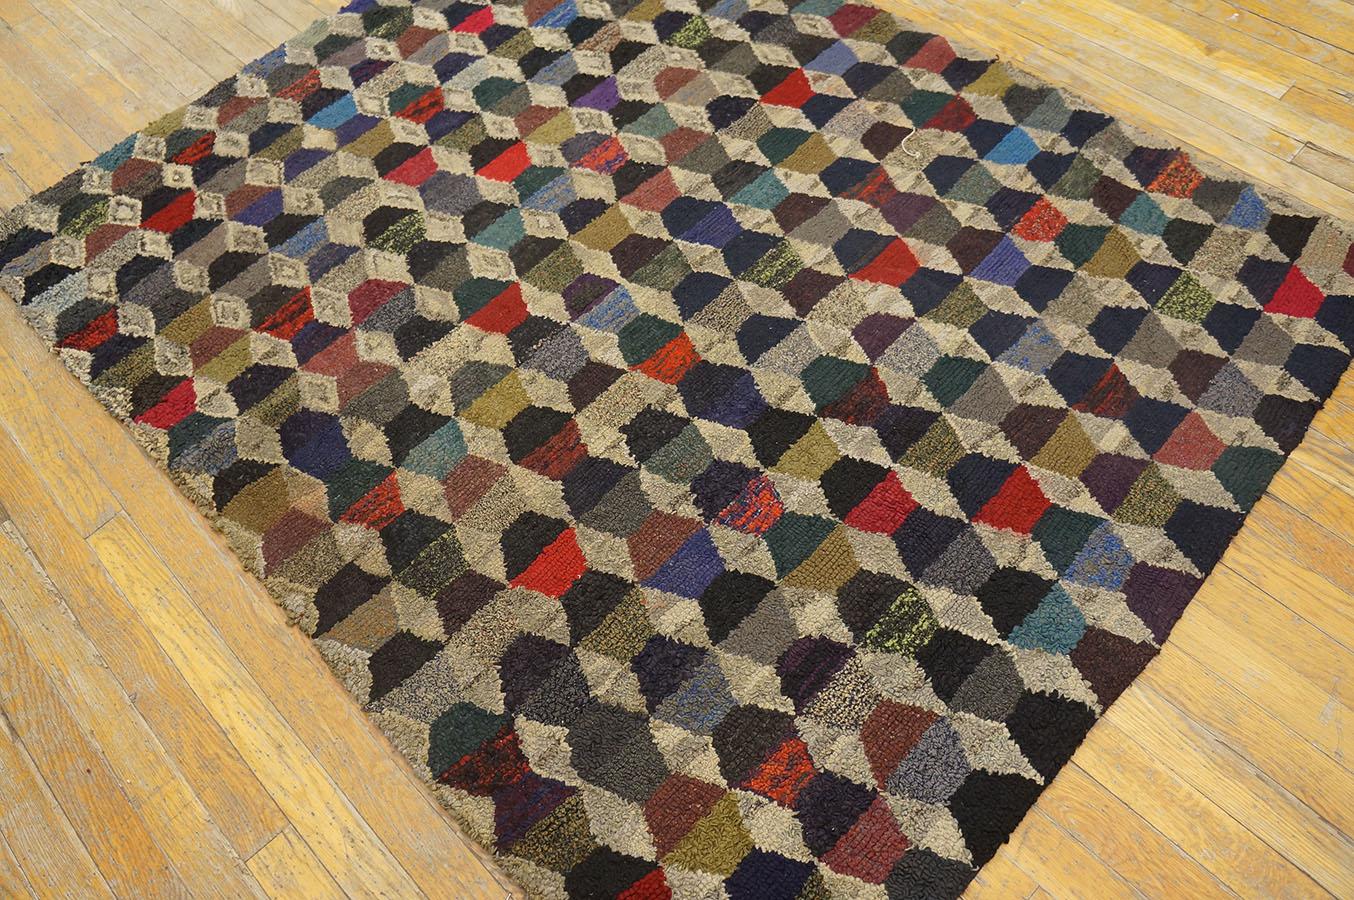 Hand-Woven Early 20th Century American Hooked Rug ( 4'2'' x 5'4'' - 127 x 162 cm ) For Sale